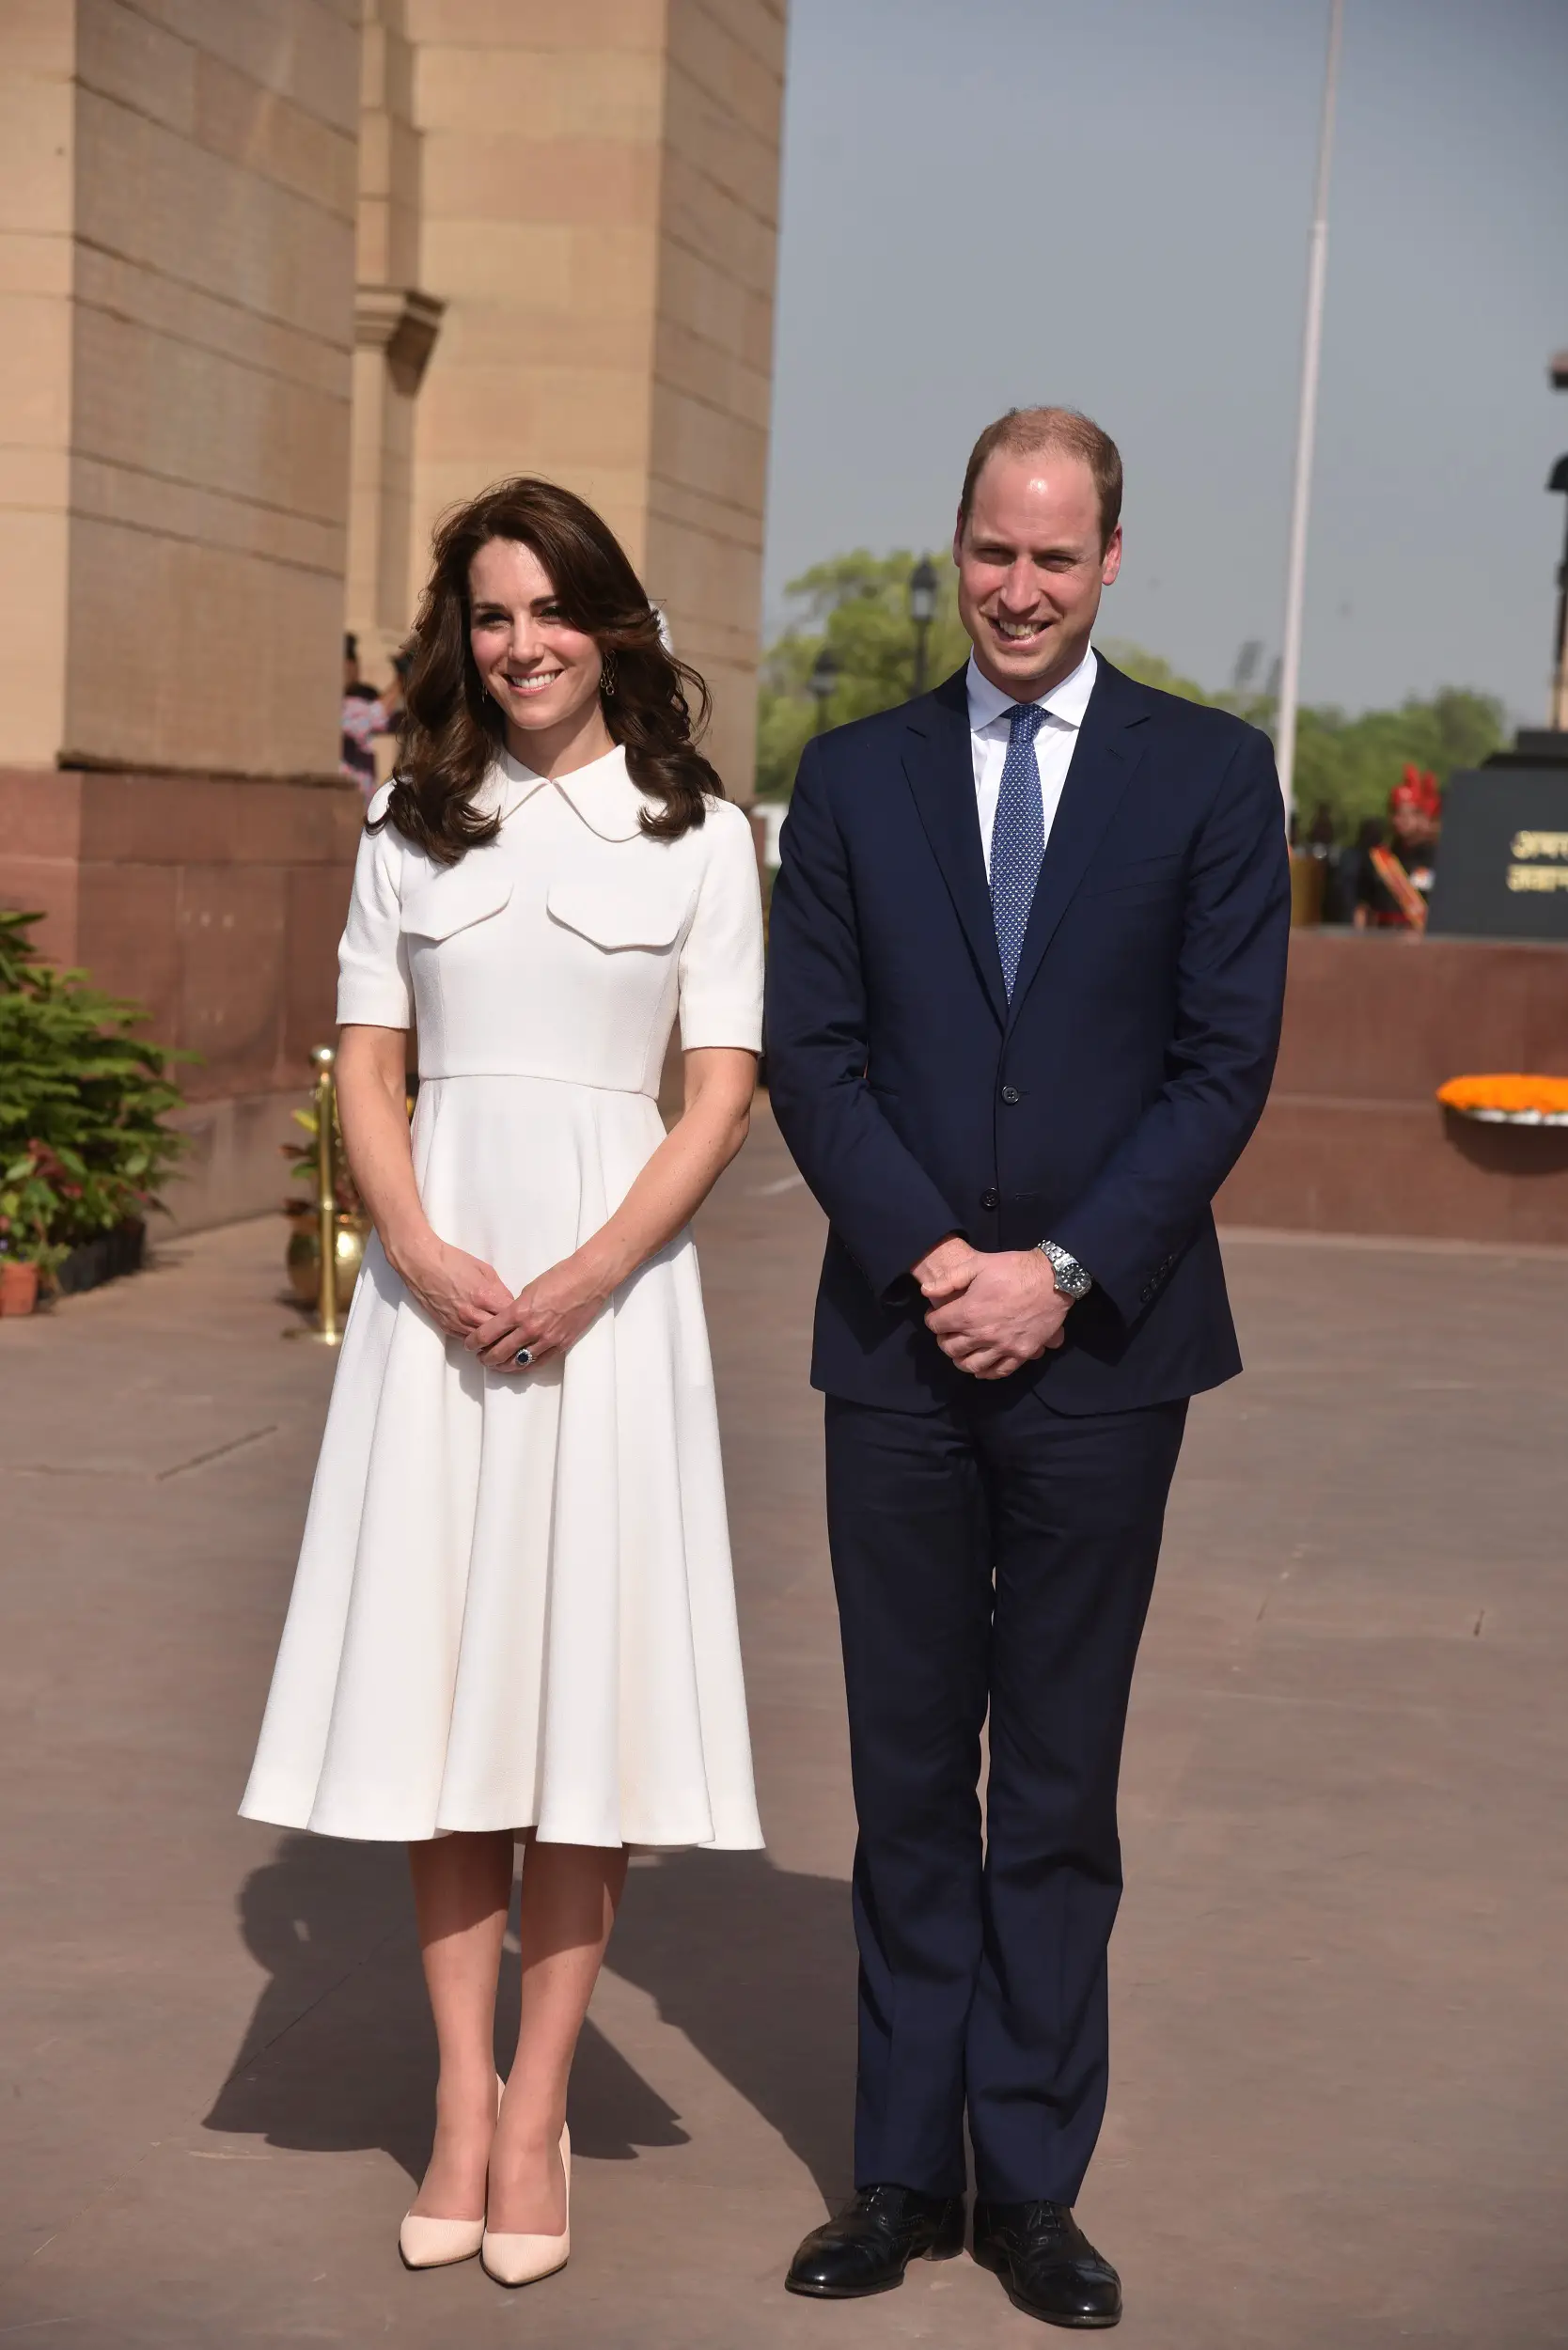 The Duke and Duchess of Cambridge at the India Gate